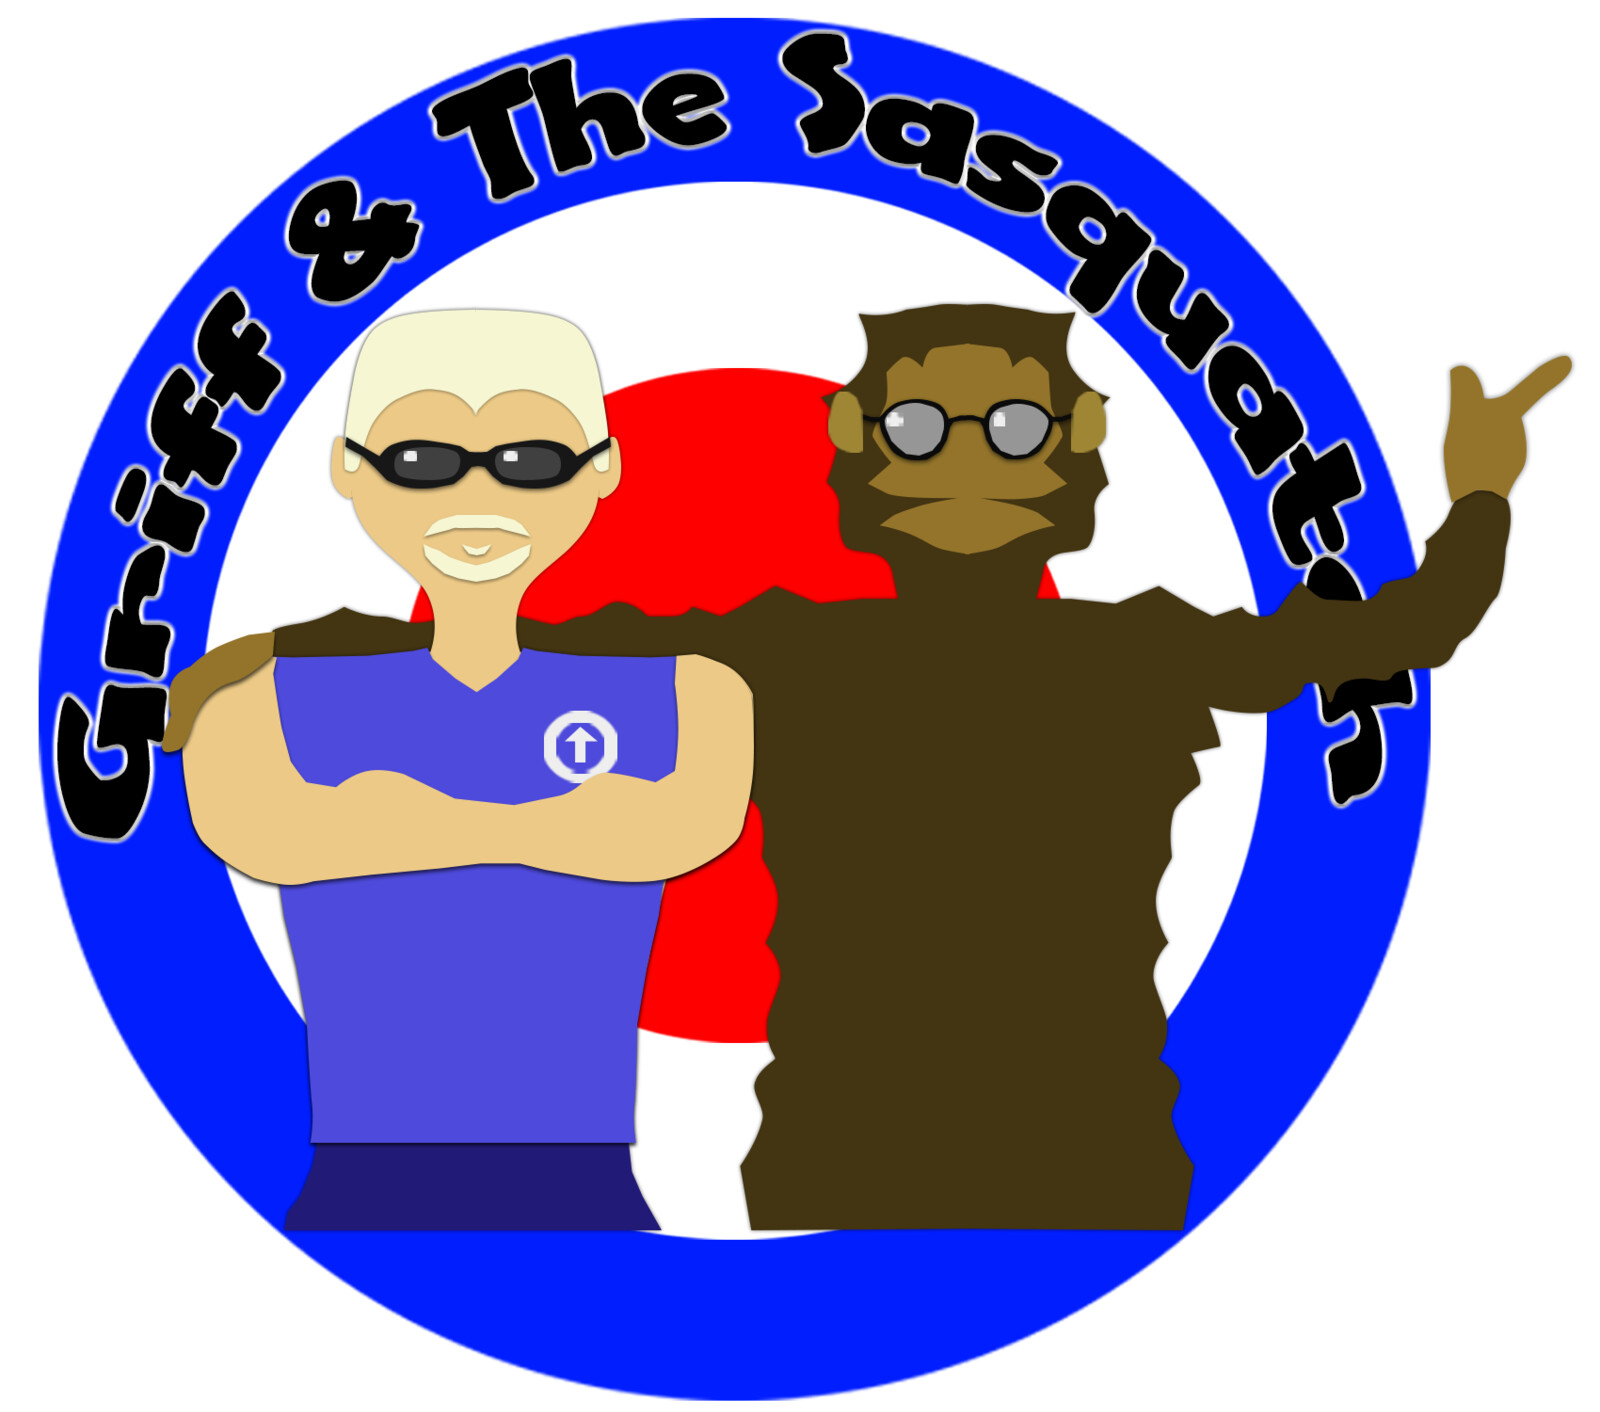 The first iteration of the logo for Griff &amp; The Sasquatch YT channel